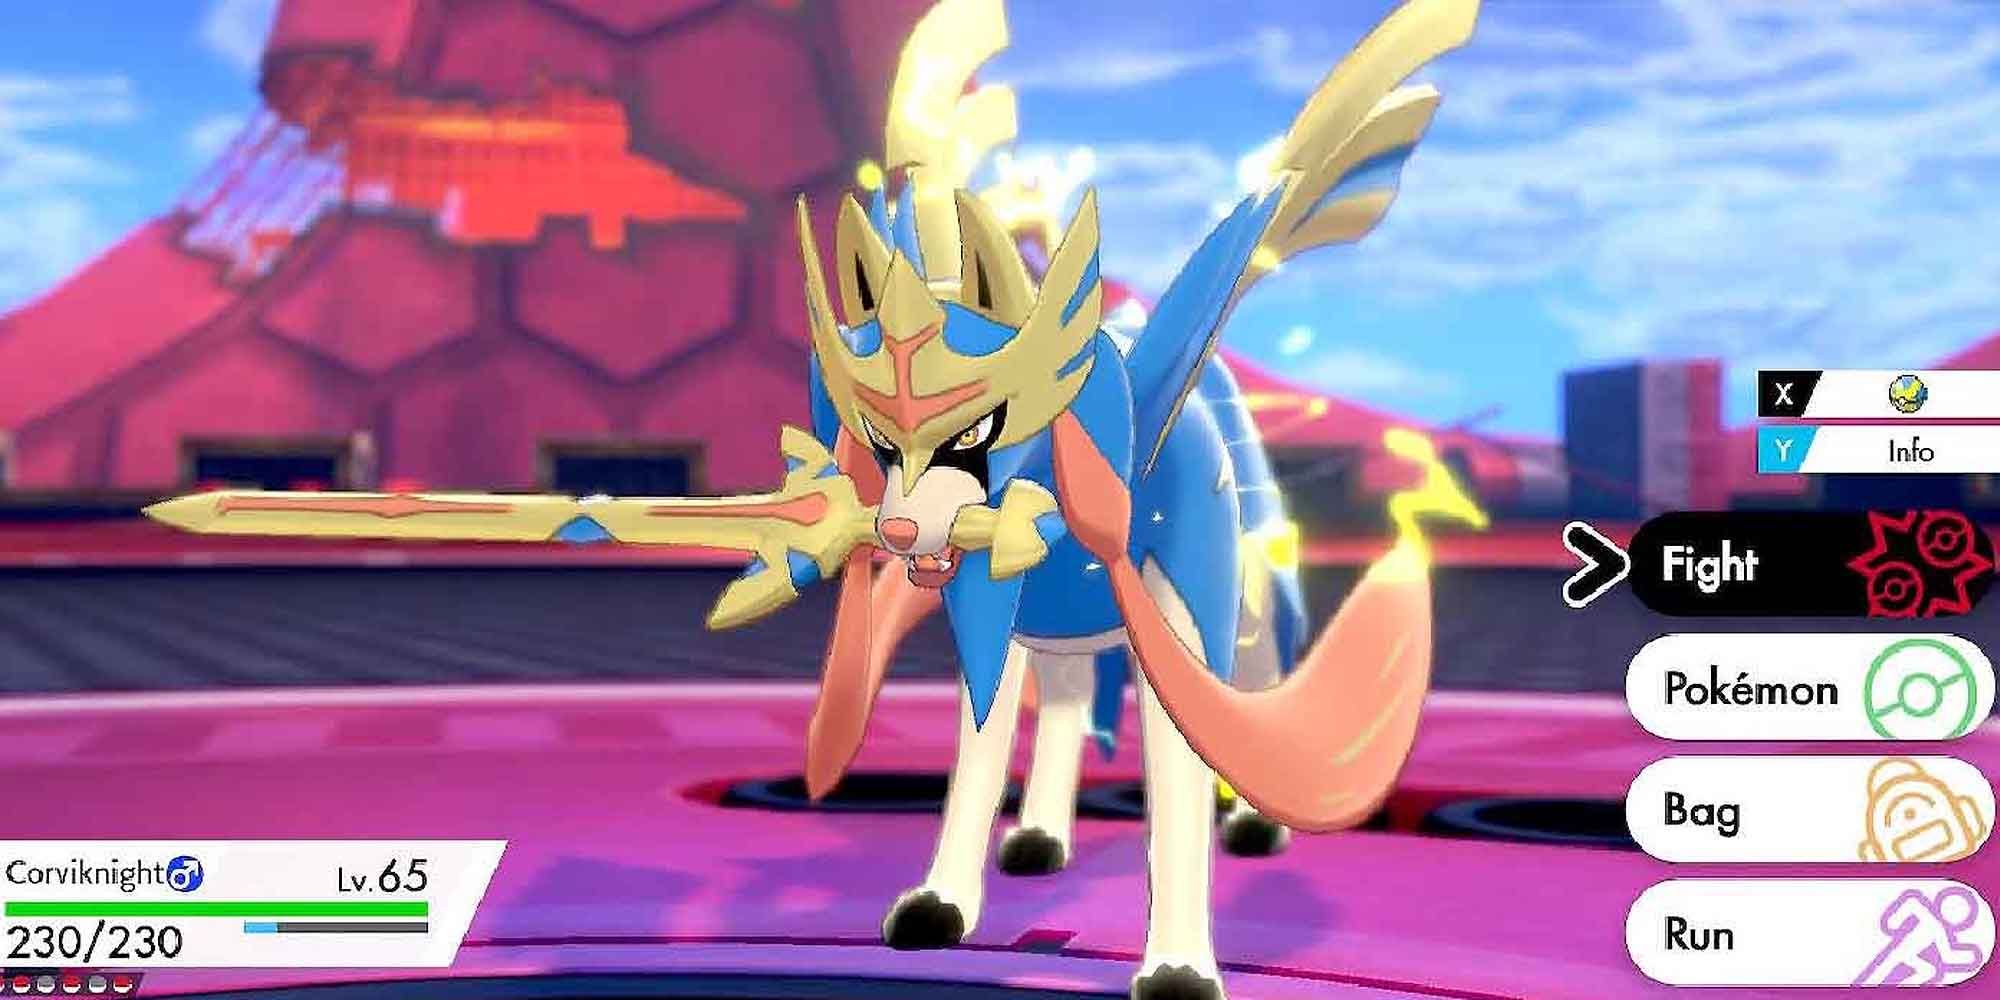 Zacian, one of the new legendary Pokemon in Sword and Shield